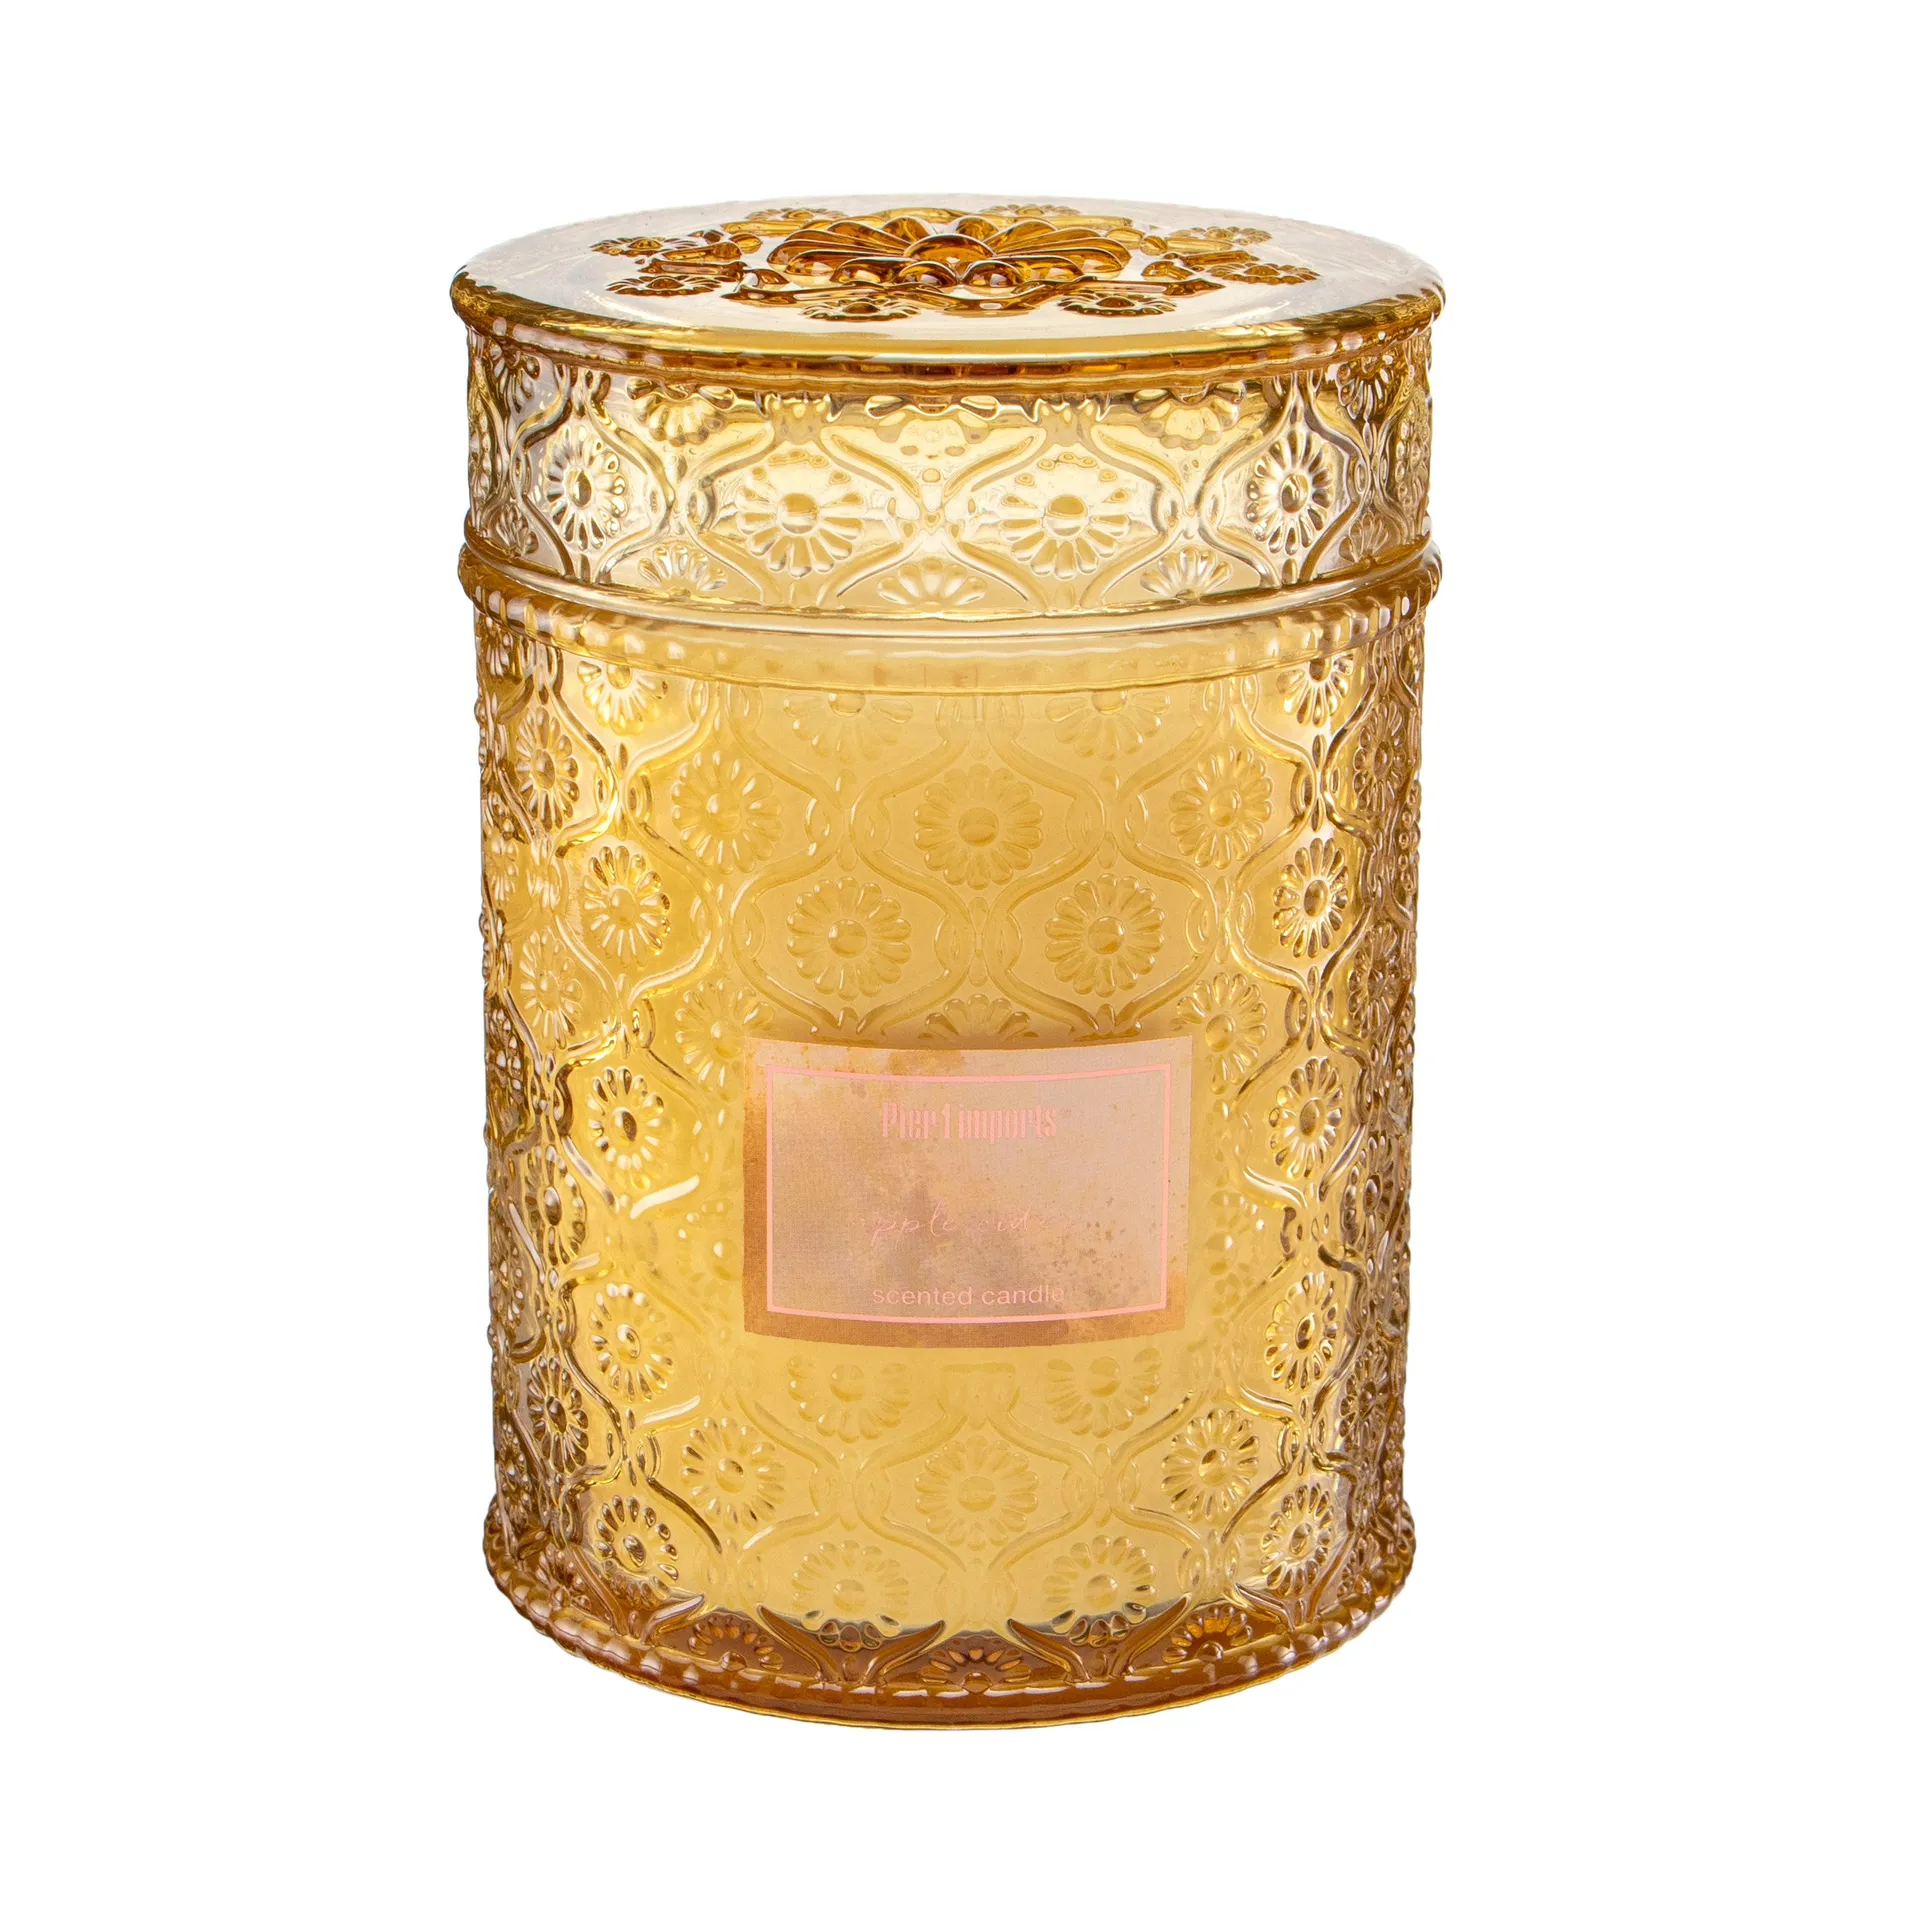 Pier 1 Apple Cider 19oz Luxe Filled Candle